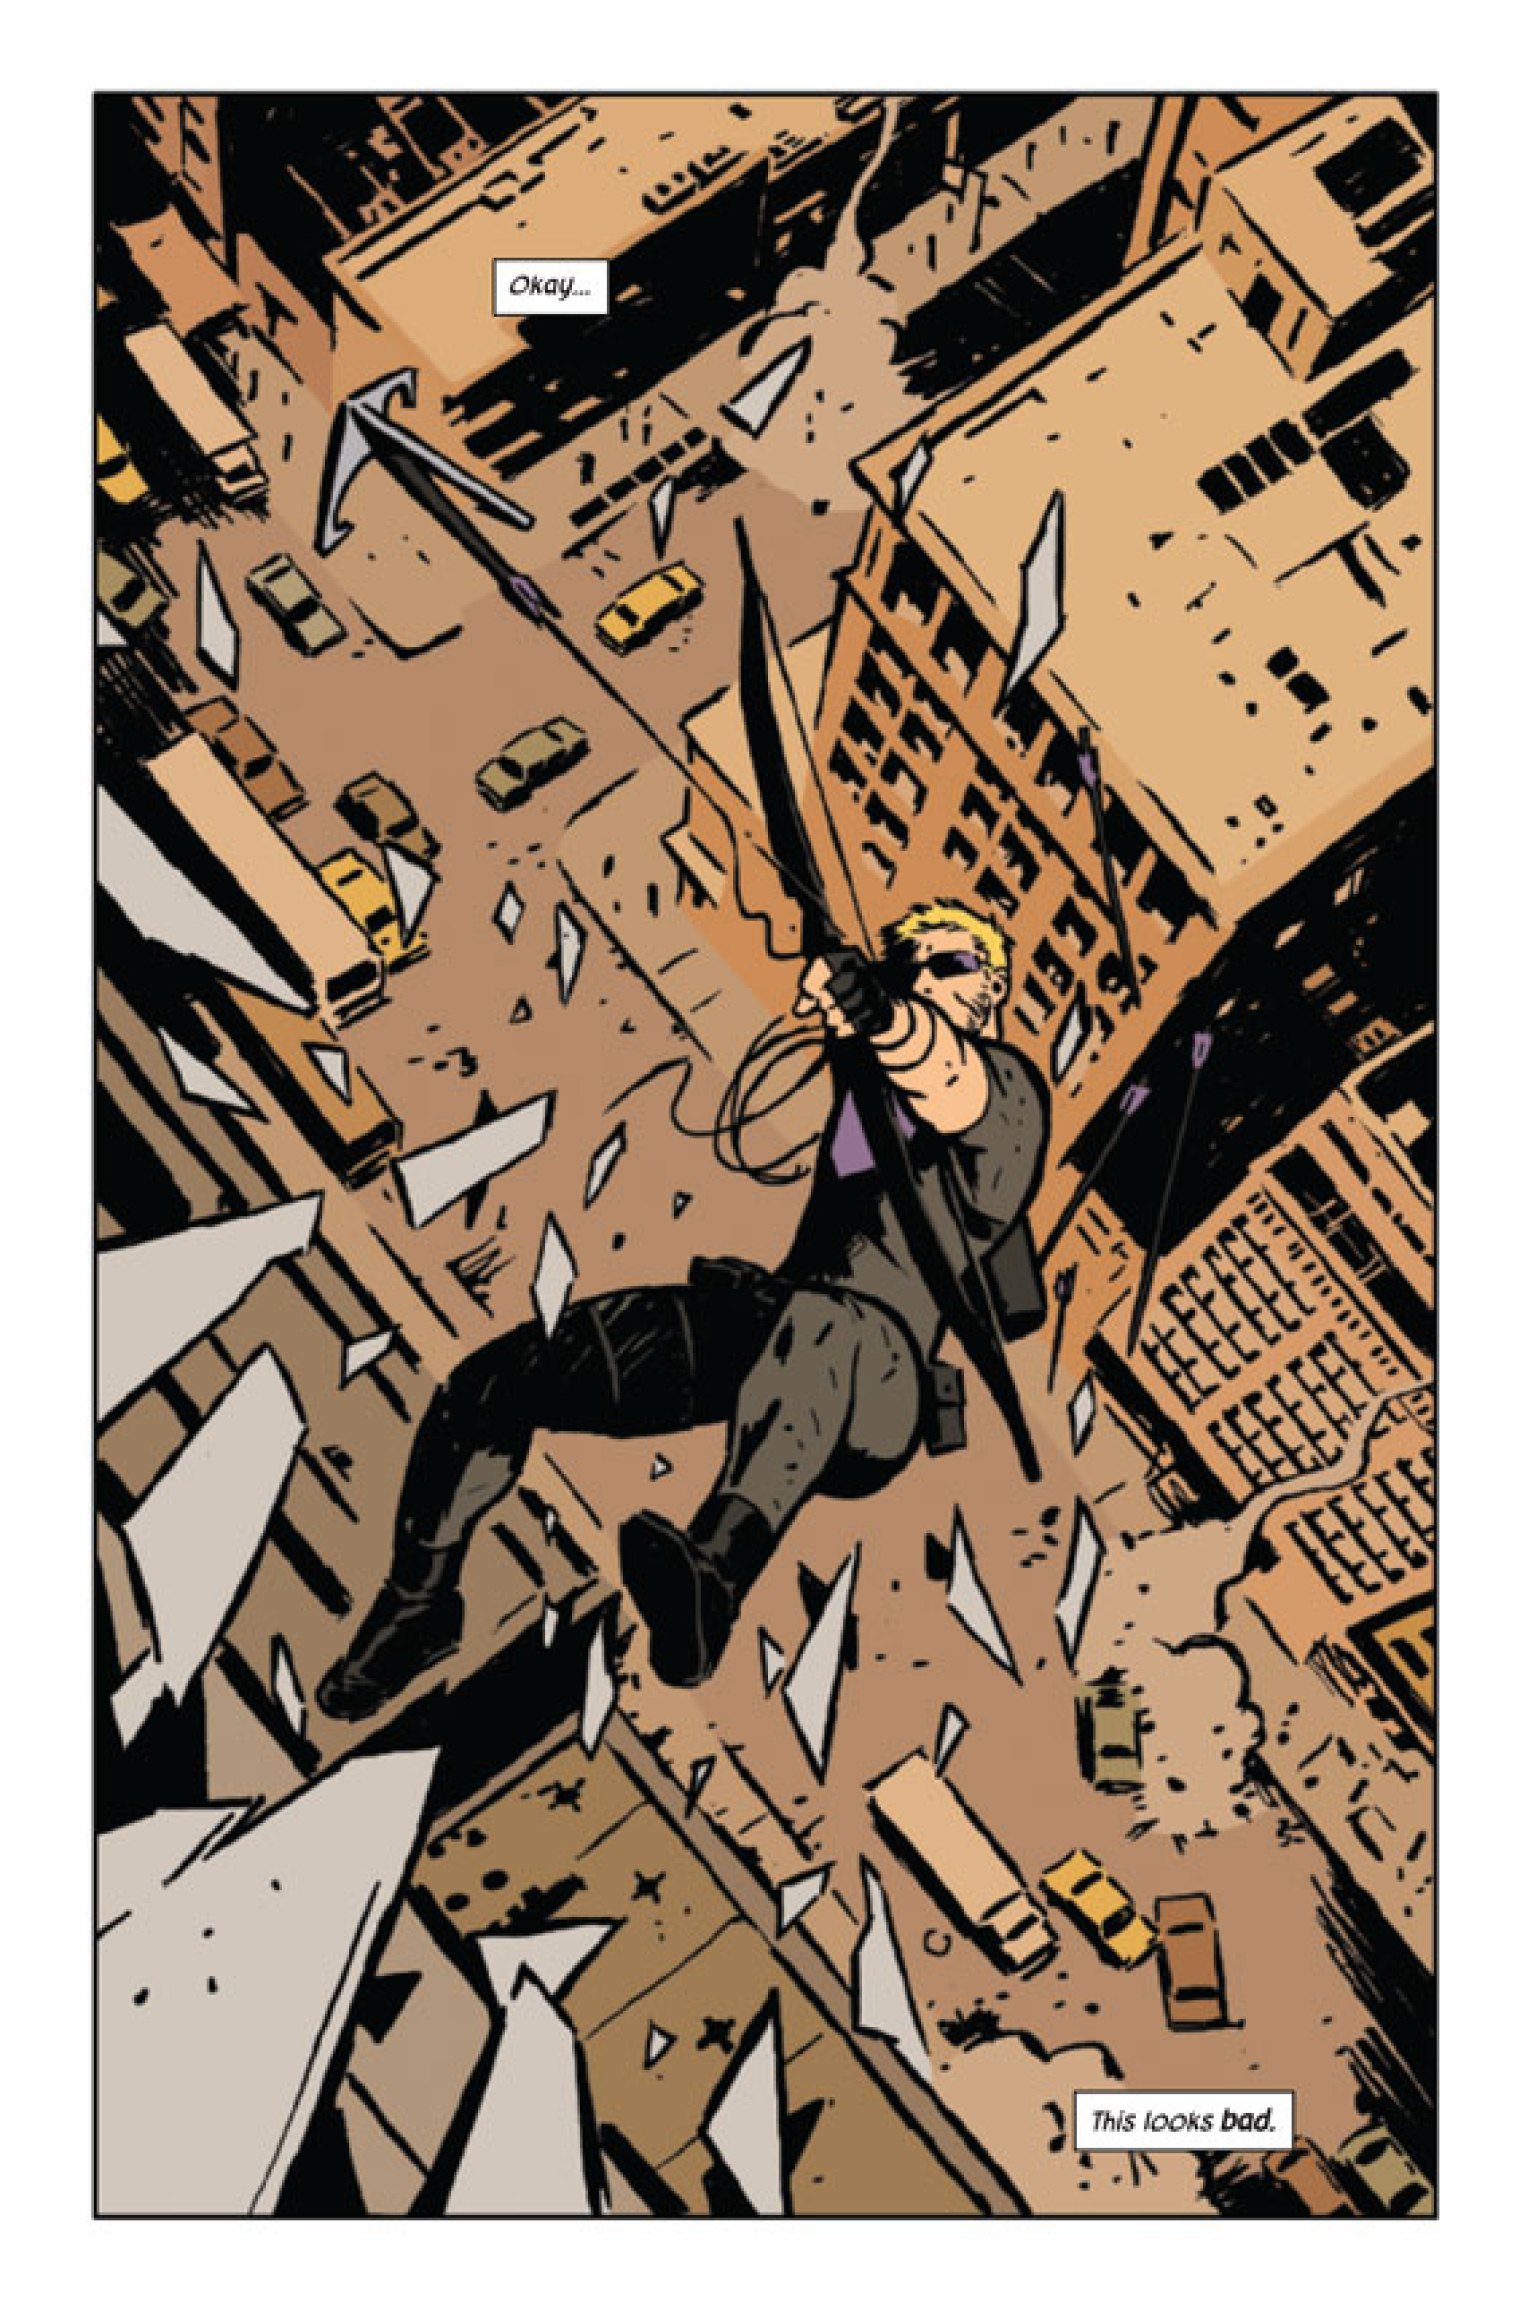 'Hawkeye's' Matt Fraction And David Aja Talk About Their Acclaimed ...